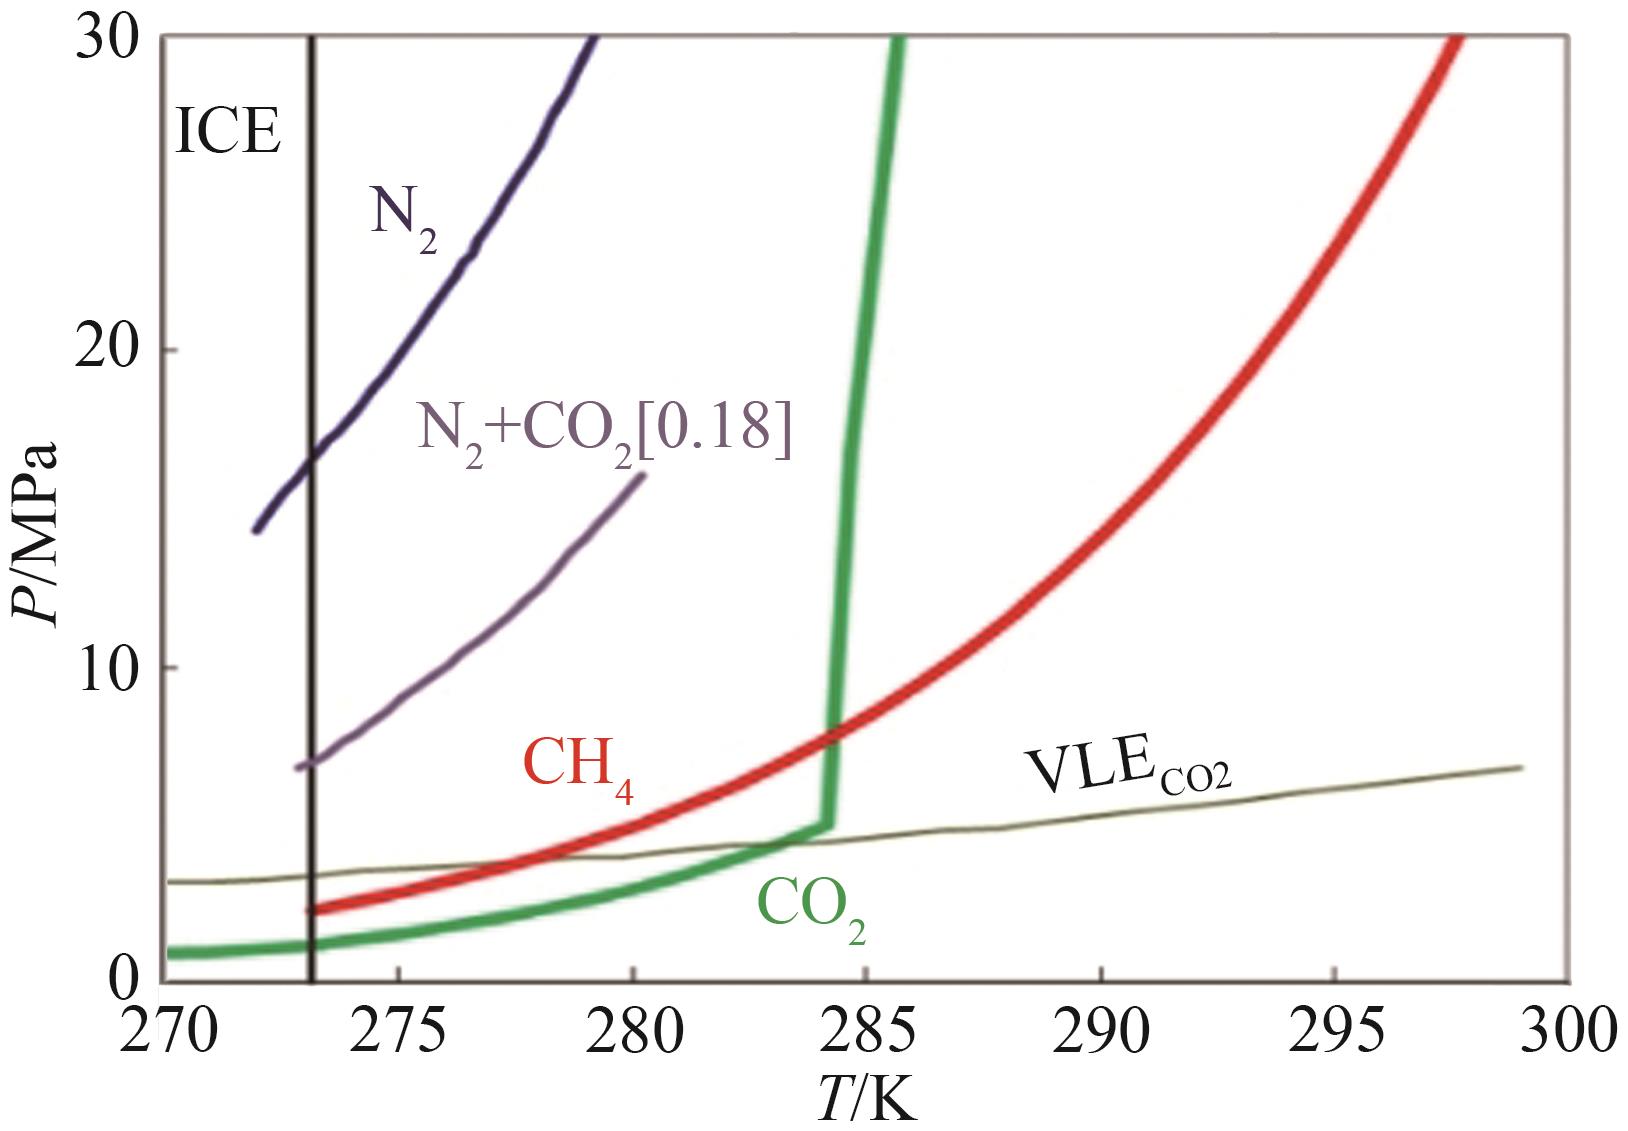 Phase equilibrium condition curves of clathrate hydrates with different guest molecules［3］